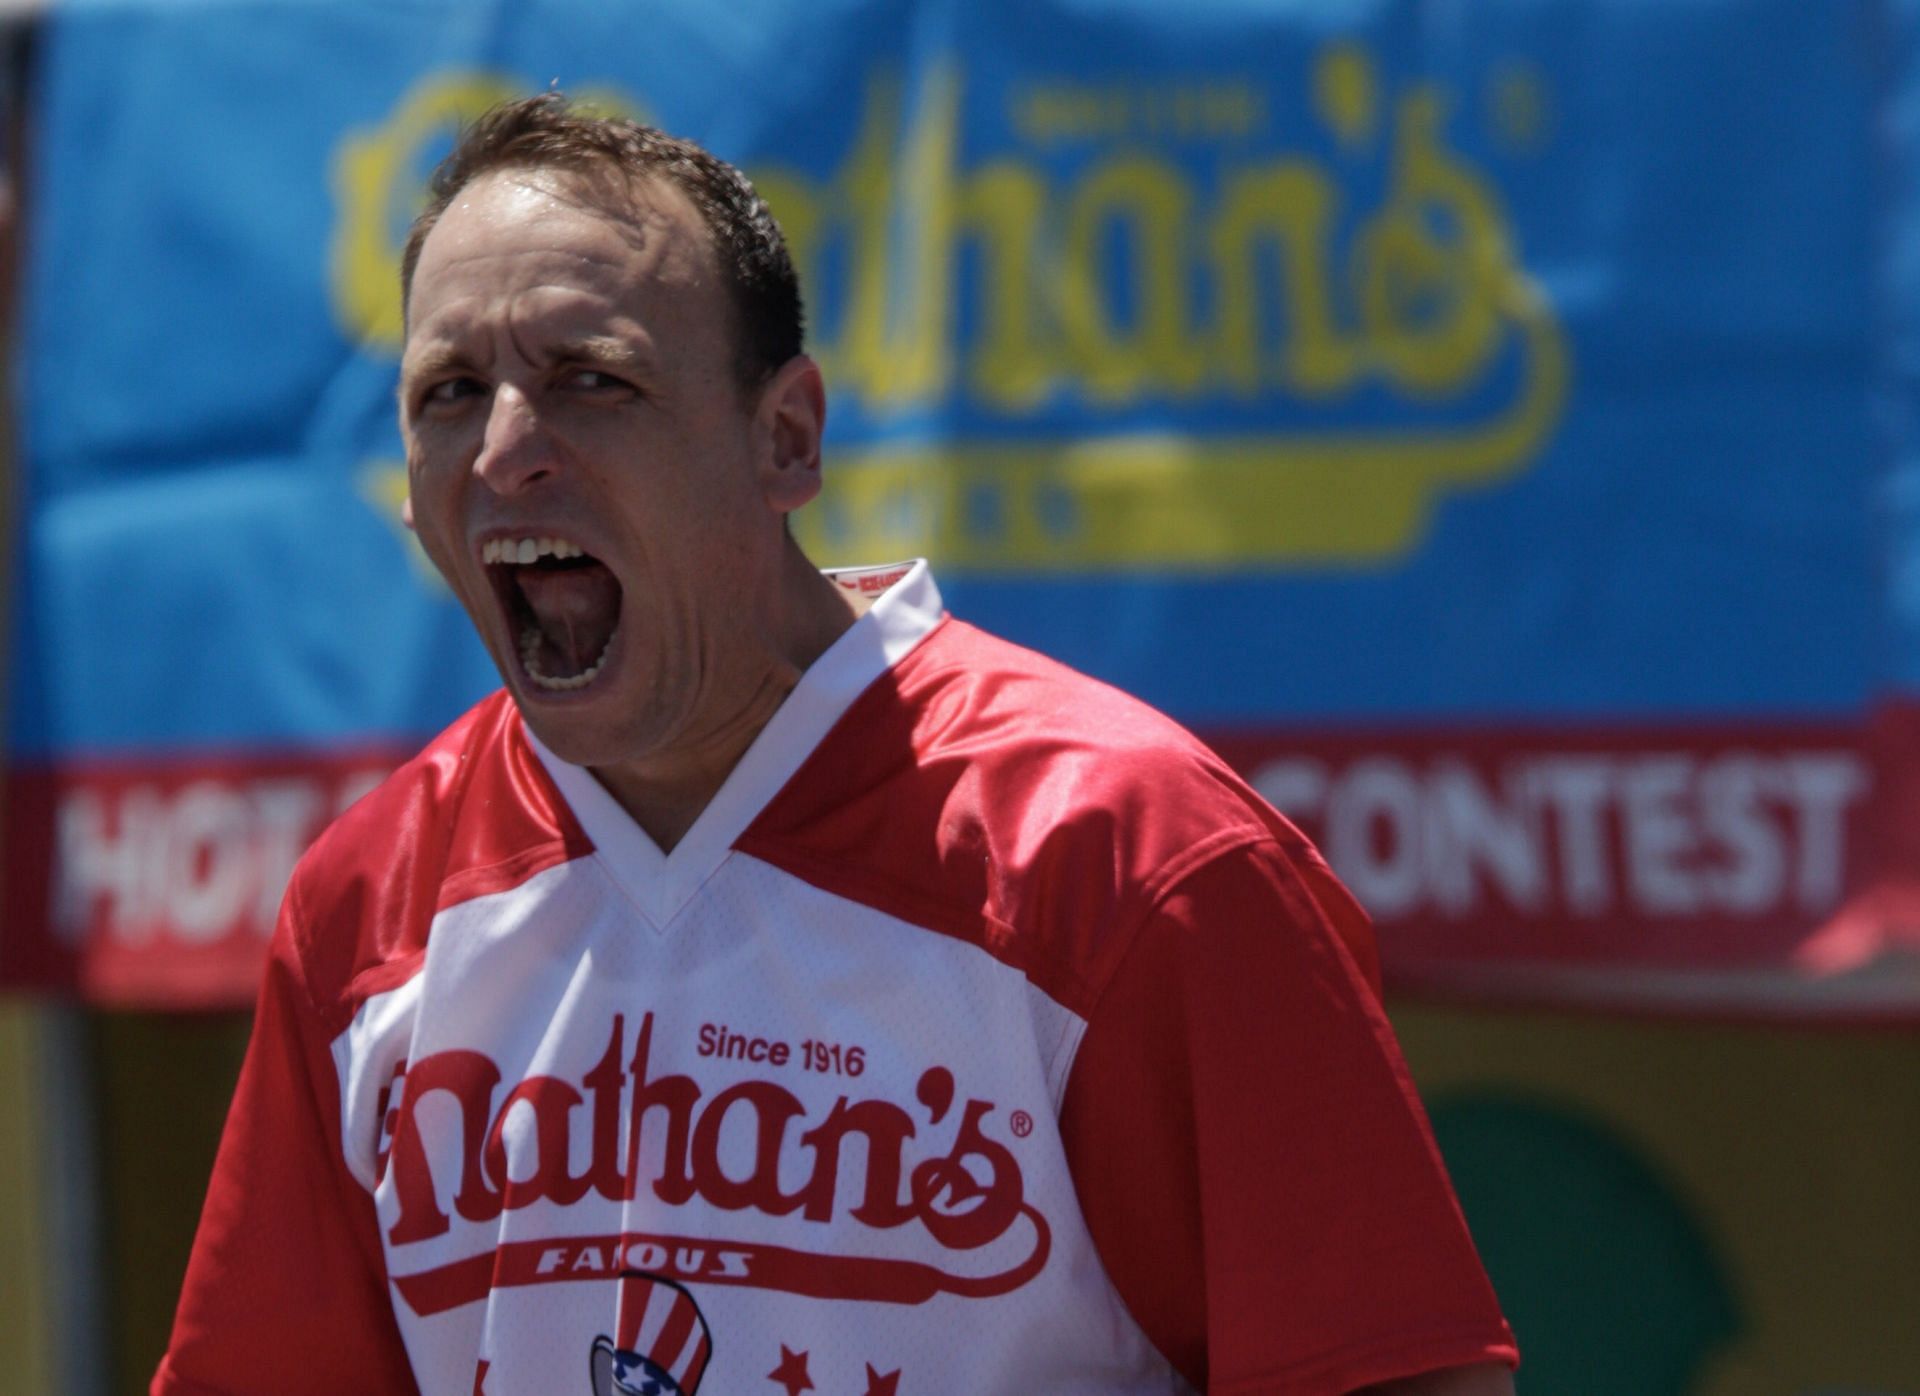 15-time hot dog-eating champion Joey Chestnut. Source: Time